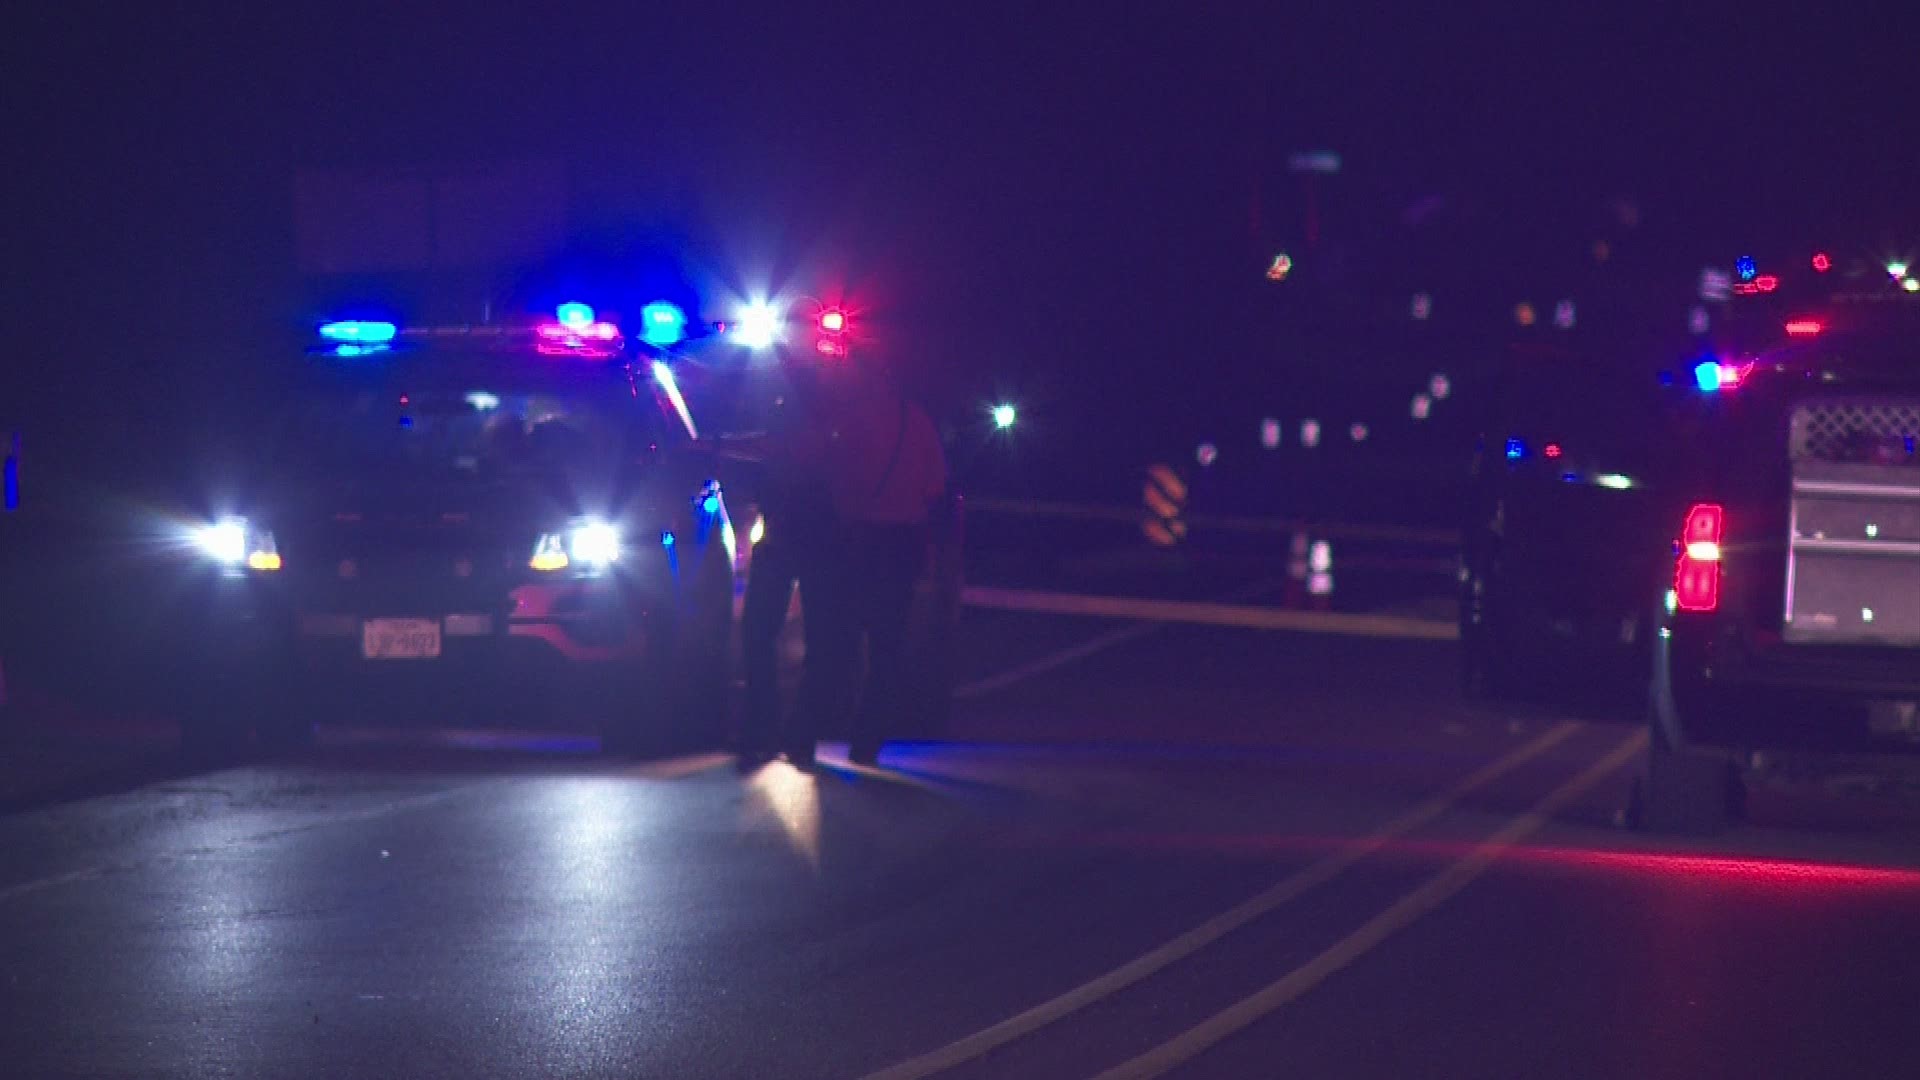 Police said the man was walking northbound on FM 1625 when he was hit by a driver who left the scene. ATCEMS pronounced the man dead on the scene.